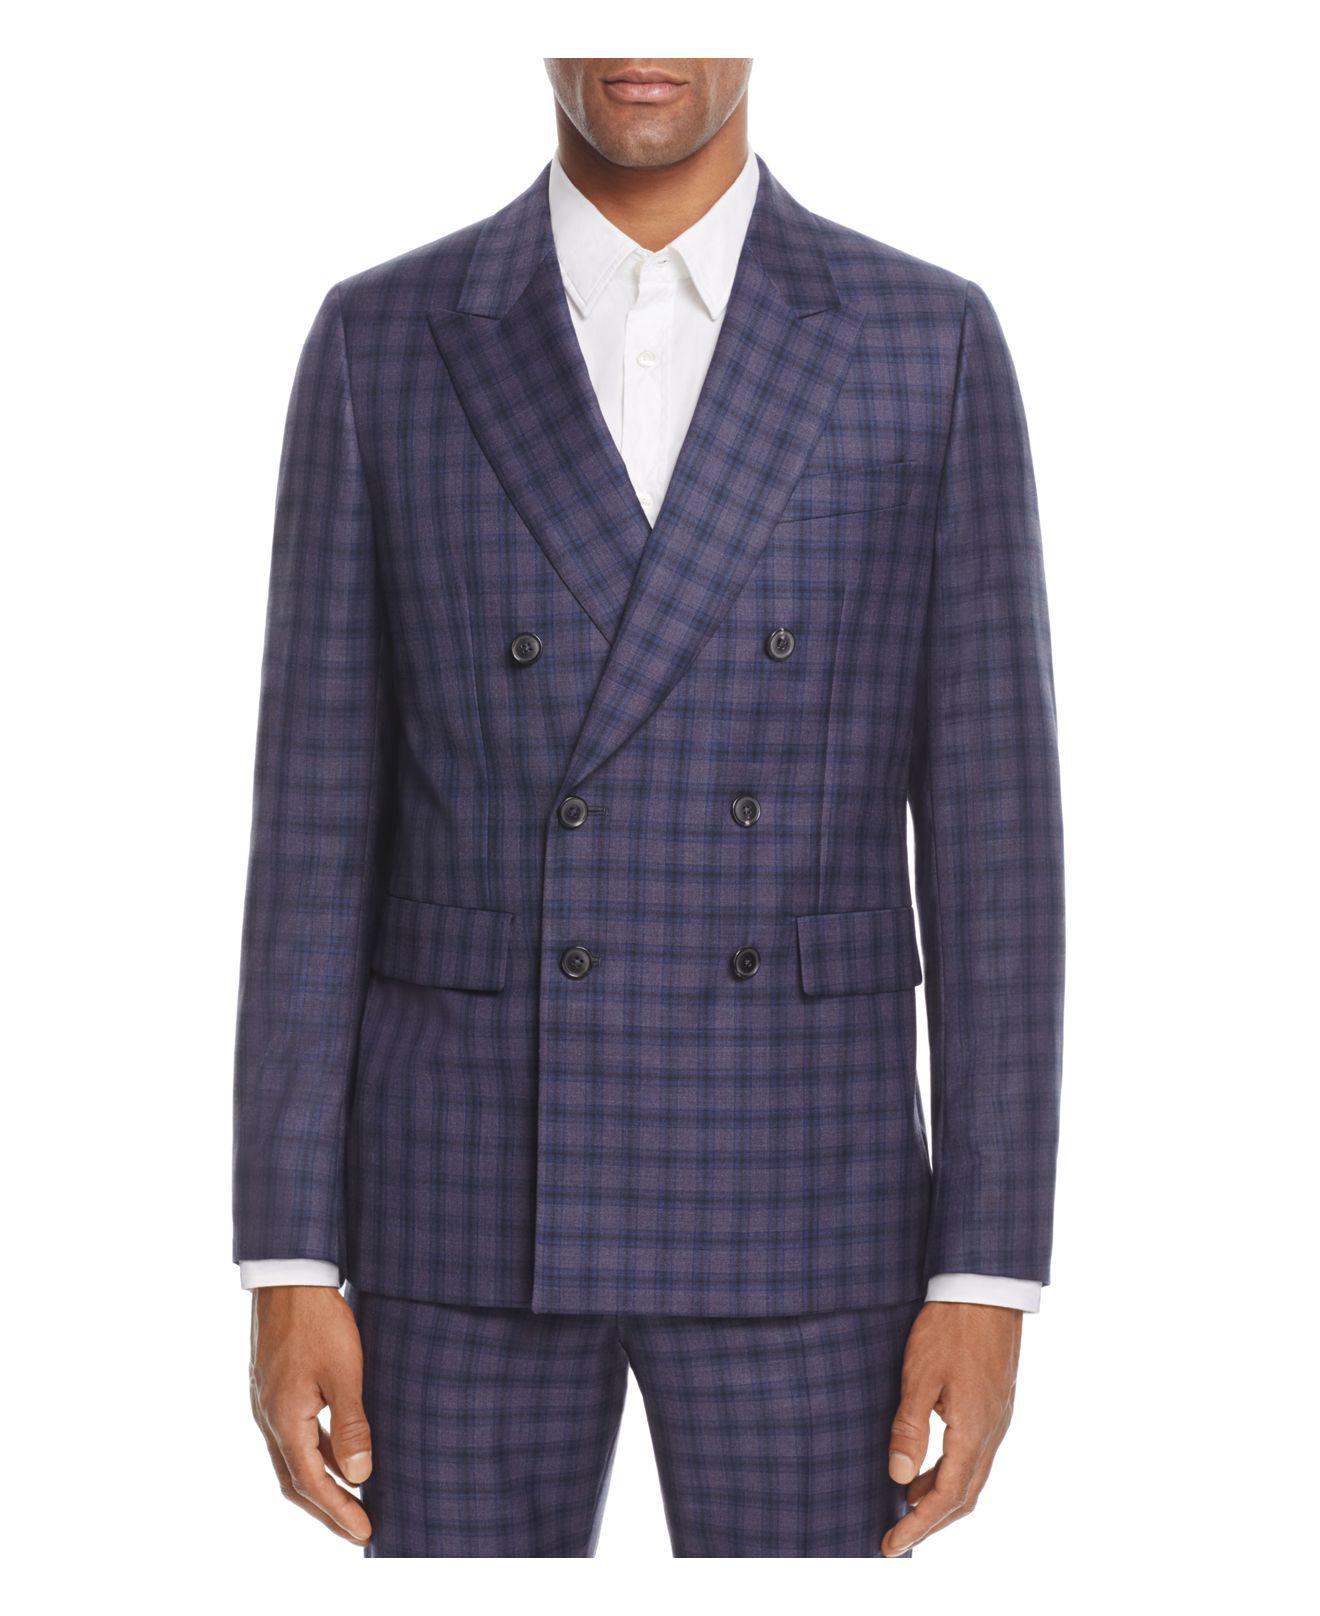 Lyst - Paul Smith Plaid Double-breasted Slim Fit Sport Coat in Blue for Men